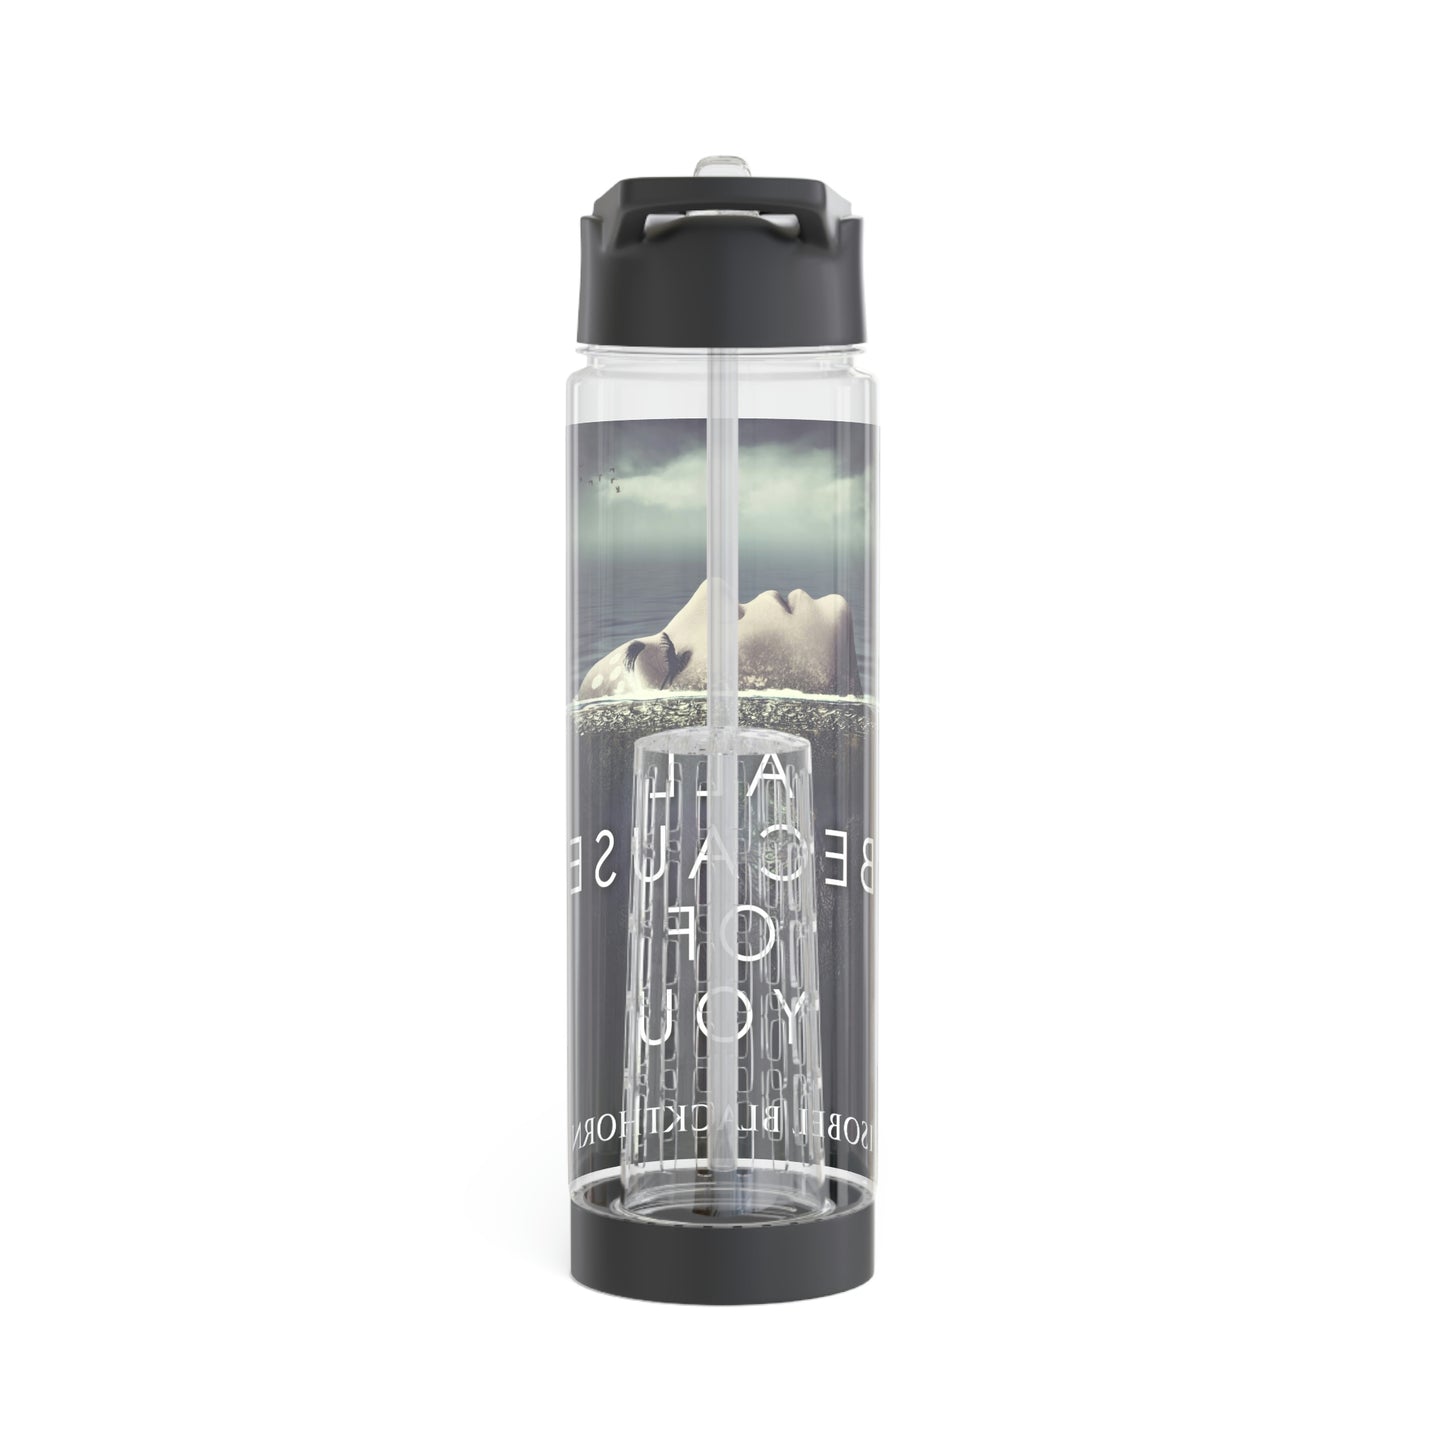 All Because Of You - Infuser Water Bottle